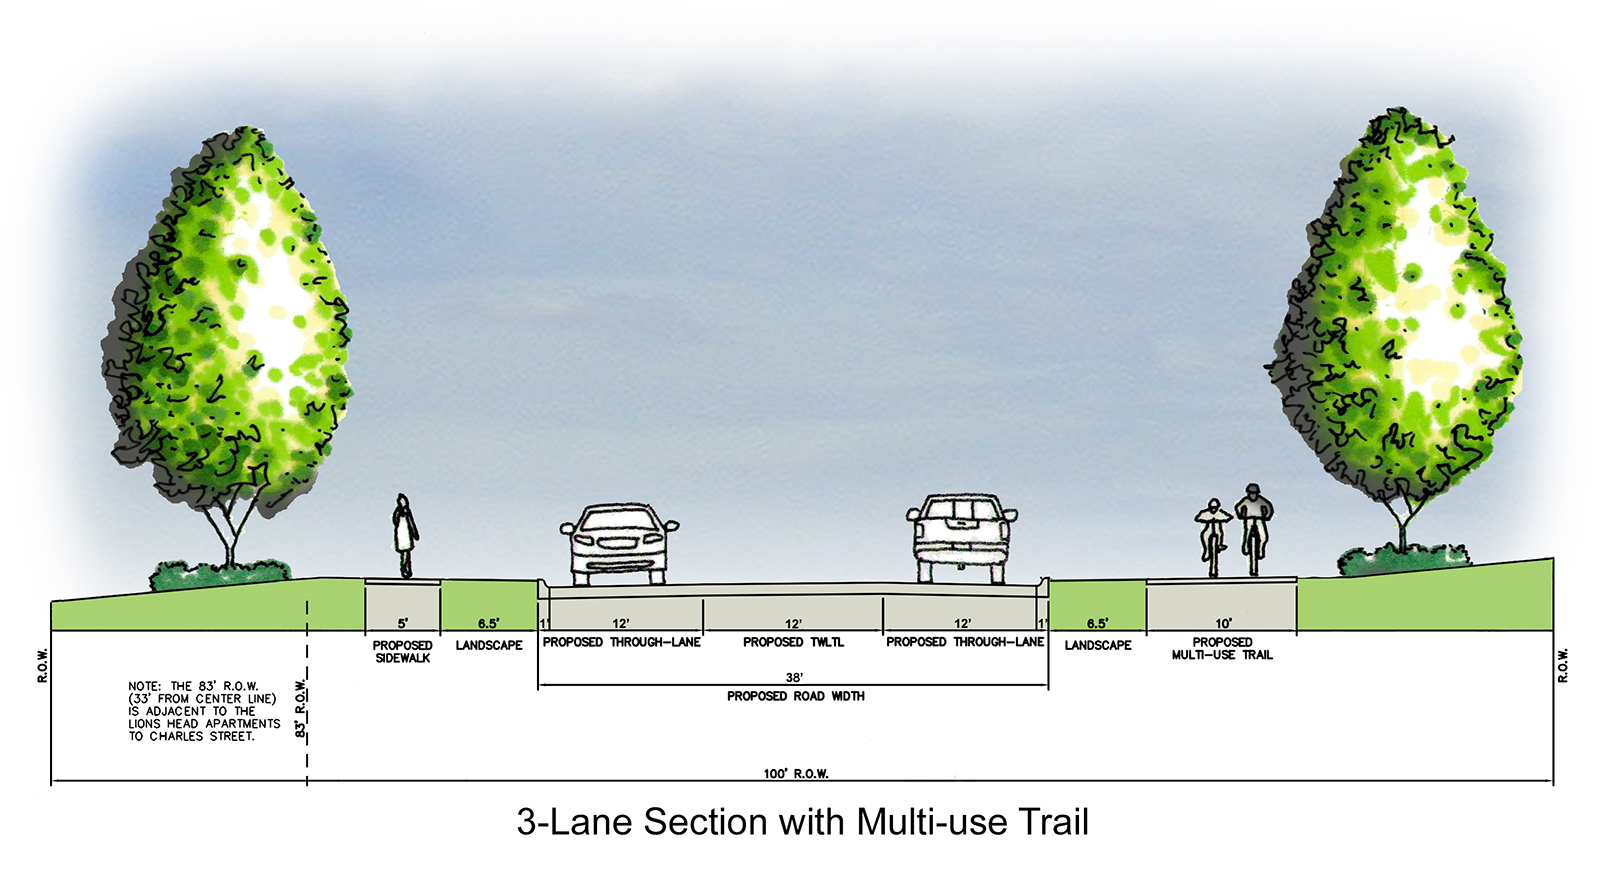 An image of the 3-lane section with a multi-use trail.